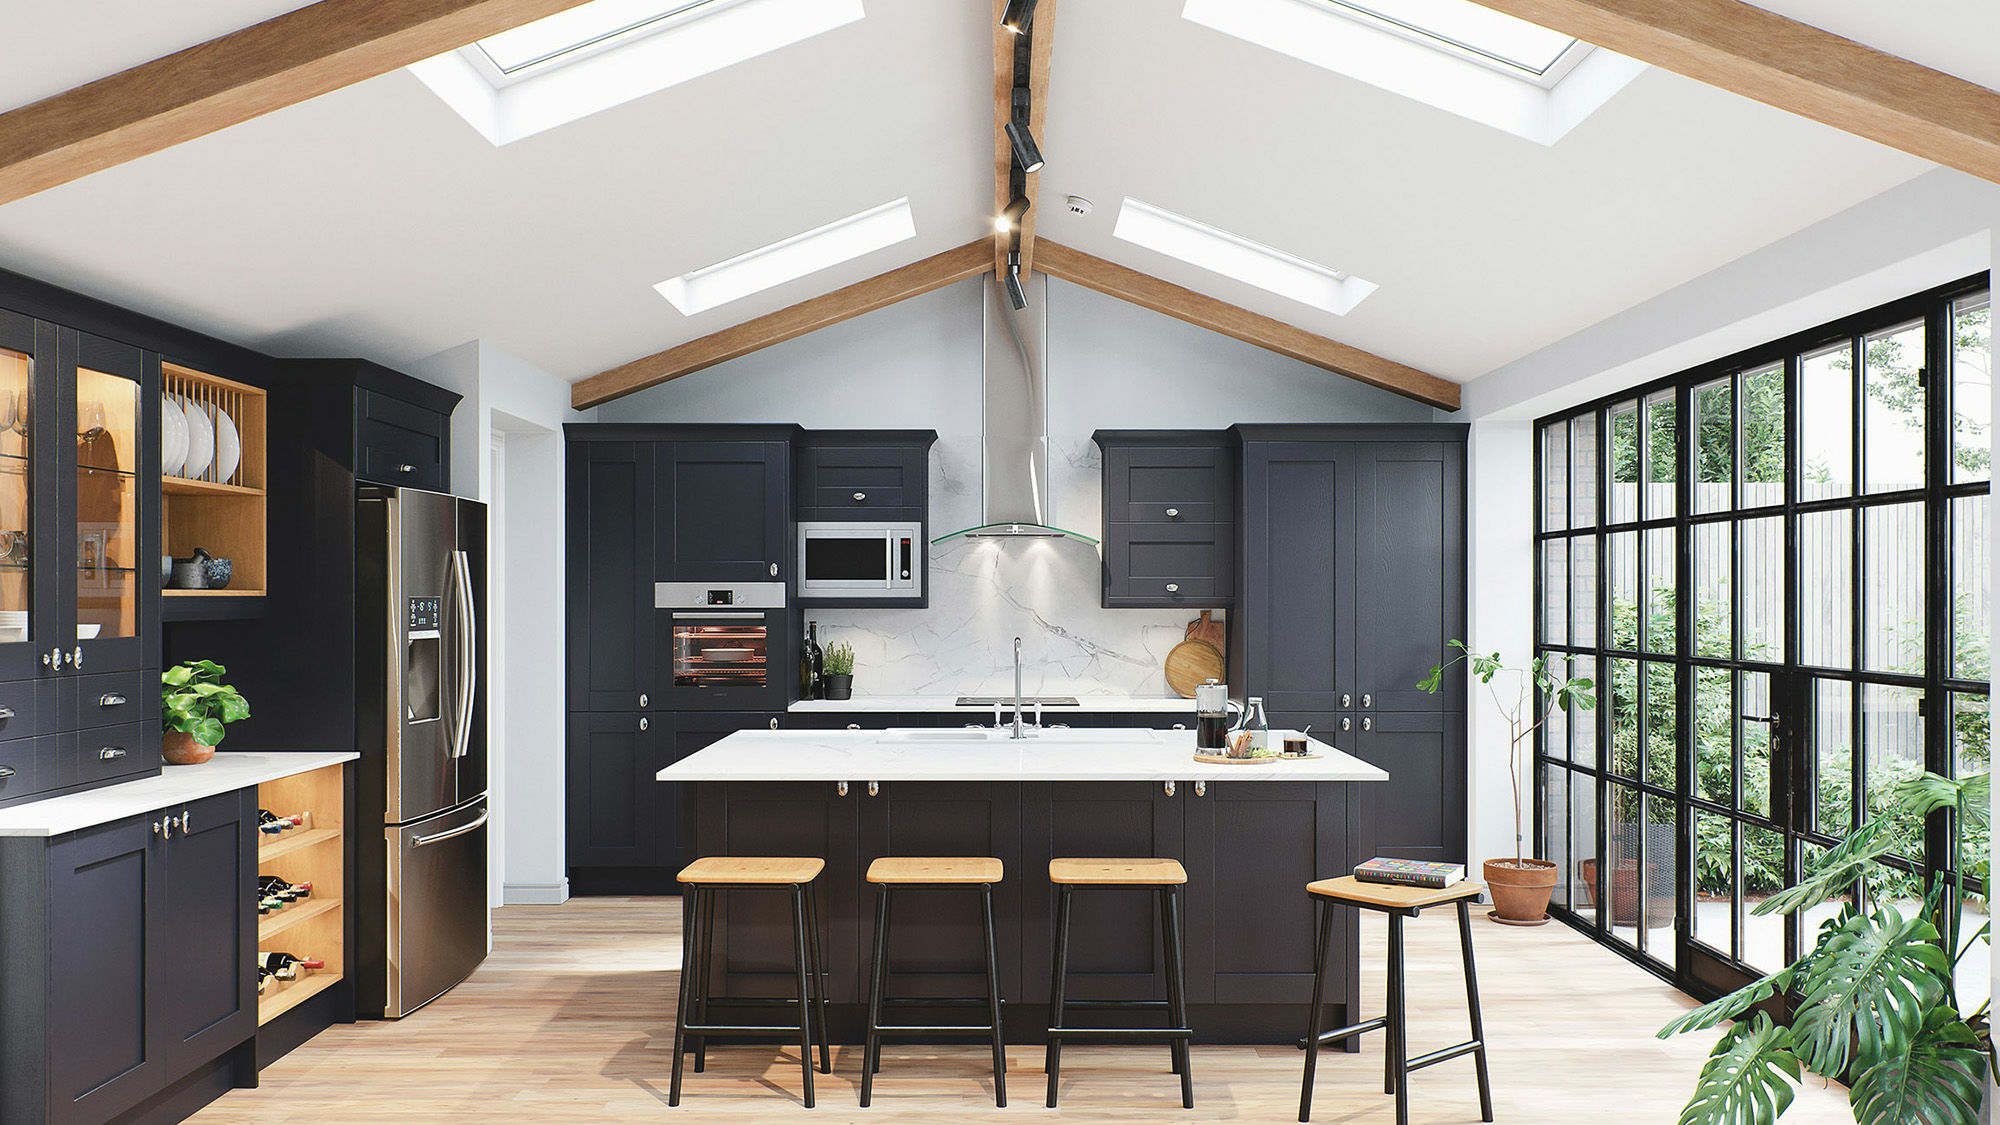 Madison Solid Wood Indigo kitchens providing solid construction in a striking indigo blue, merging durability with style